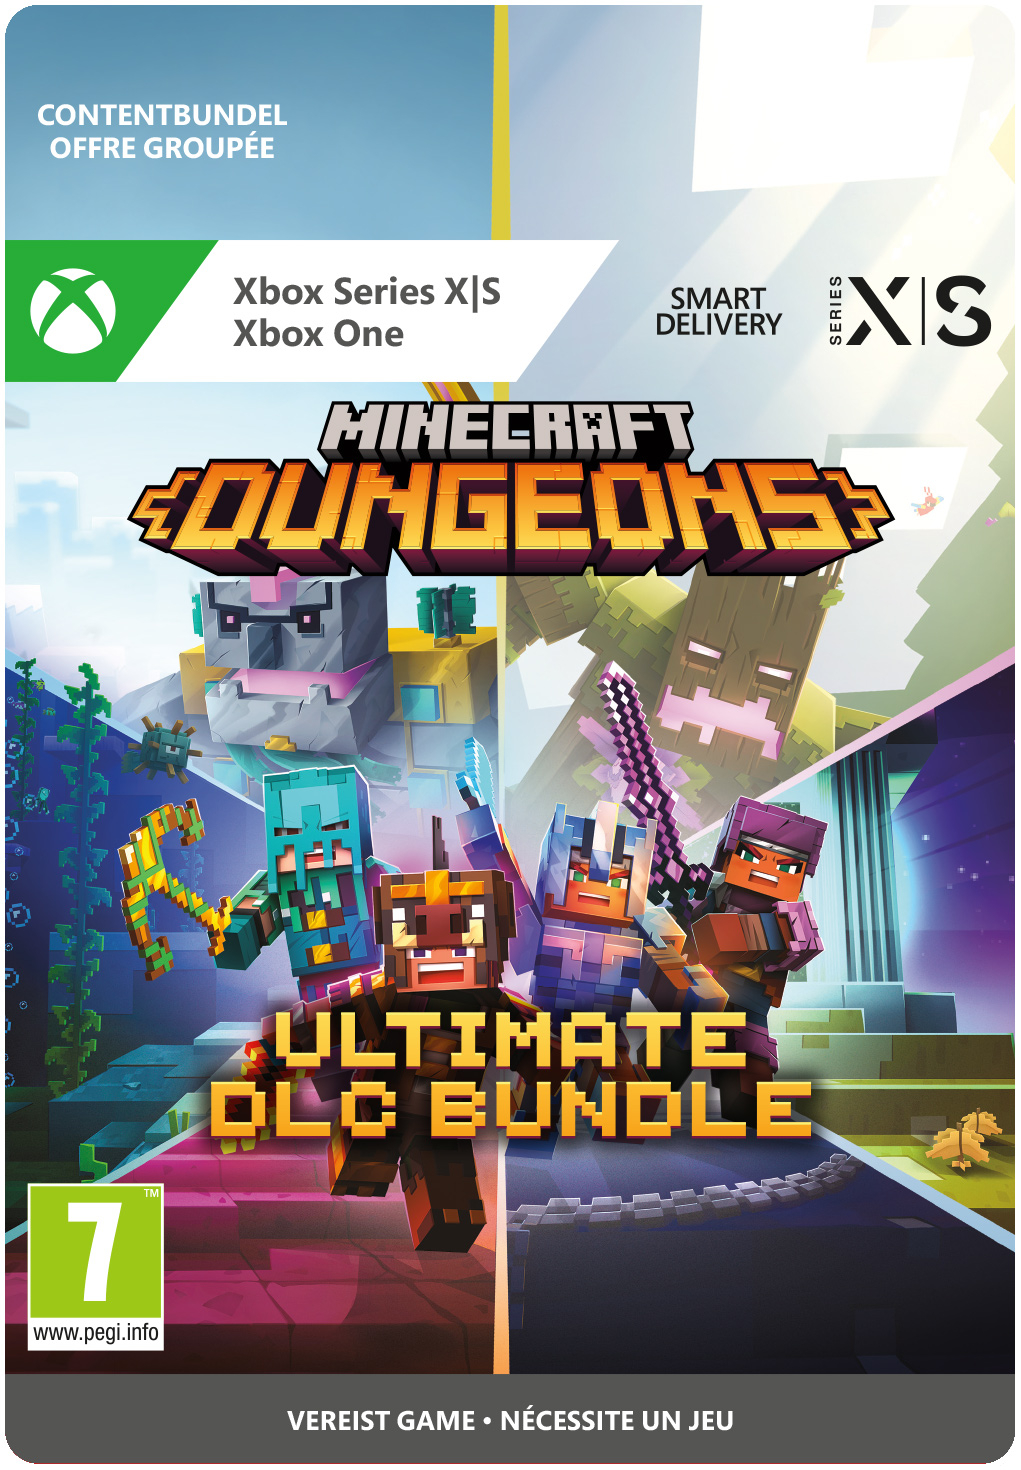 Minecraft Dungeons: Ultimate DLC Bundle - Xbox Series X|S/Xbox One - Add-on